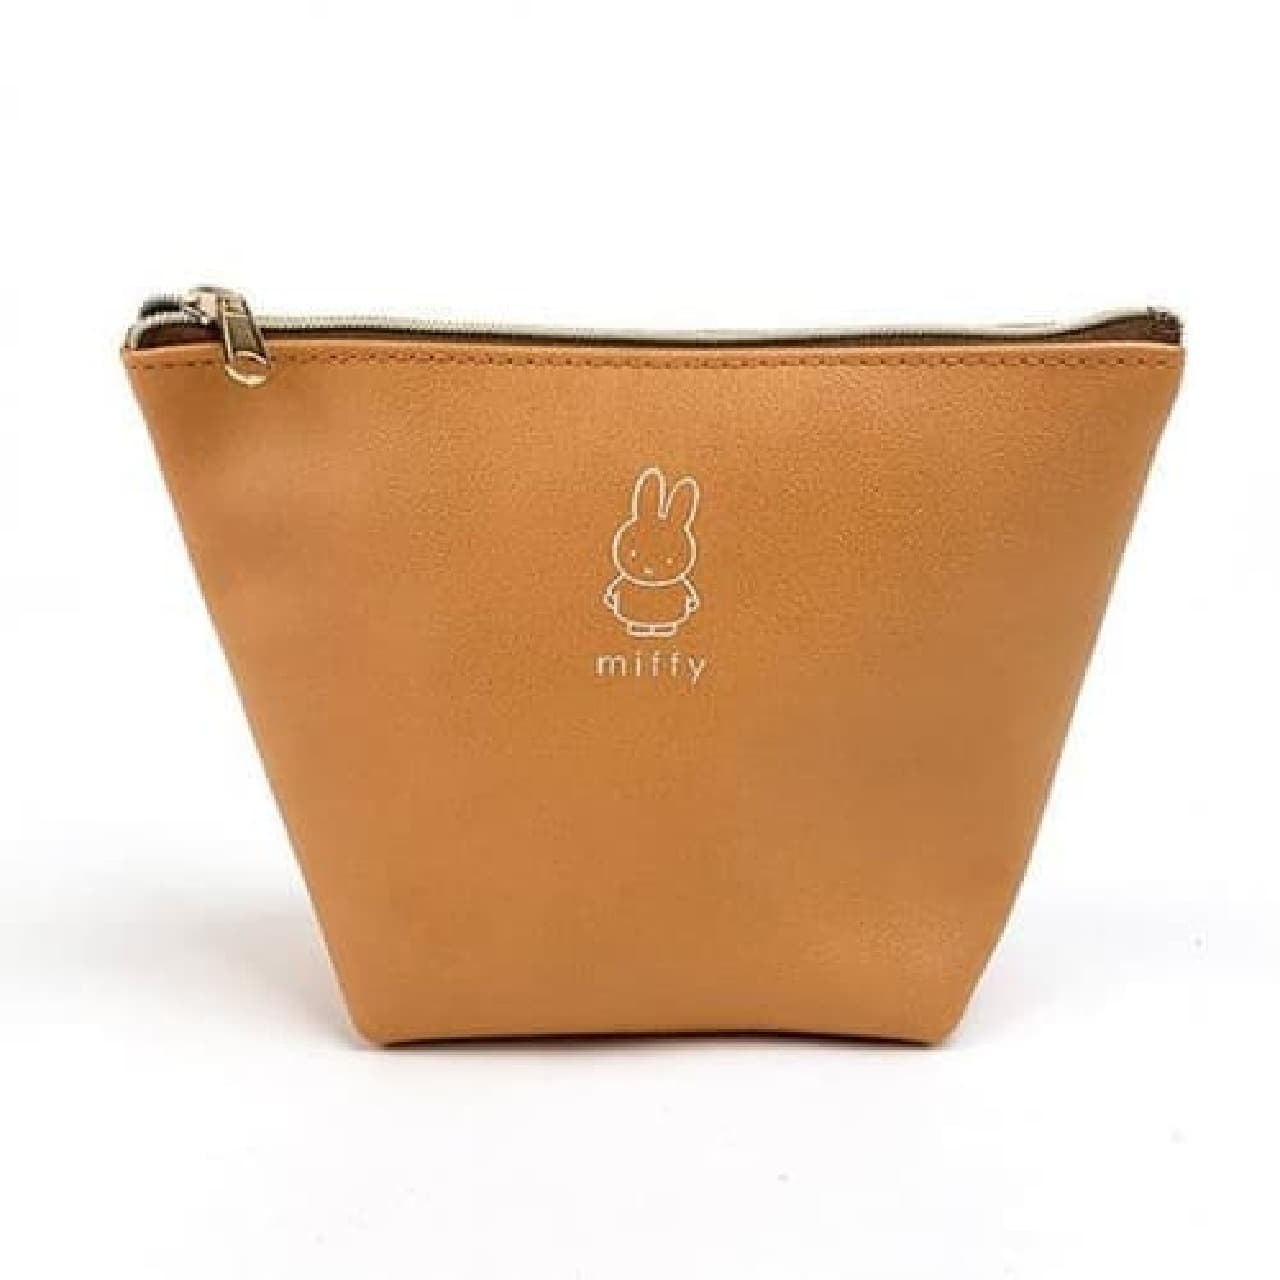 Adult-like pouch and wallet in Miffy x camel color --Also a glasses case with a cloth